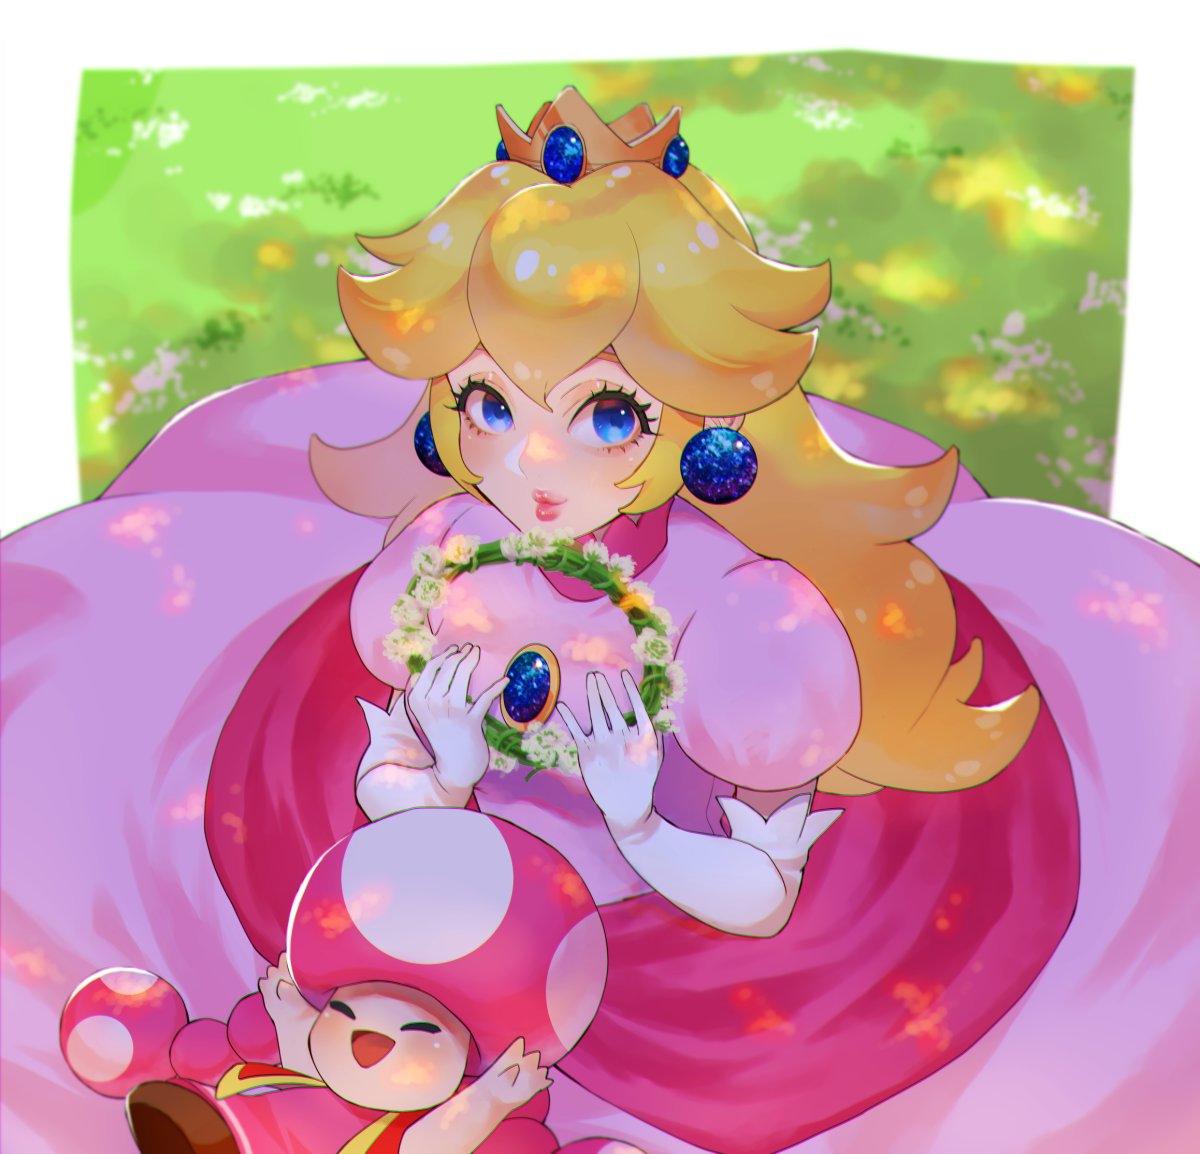 2girls blonde_hair blue_eyes brooch closed_eyes crown dress earrings elbow_gloves from_above gloves grass holding_wreath jewelry long_hair looking_at_viewer looking_up multiple_girls open_mouth pink_dress princess_peach puffy_short_sleeves puffy_sleeves red_vest short_sleeves sphere_earrings super_mario_bros. toadette vest white_gloves yoghurt_umauma